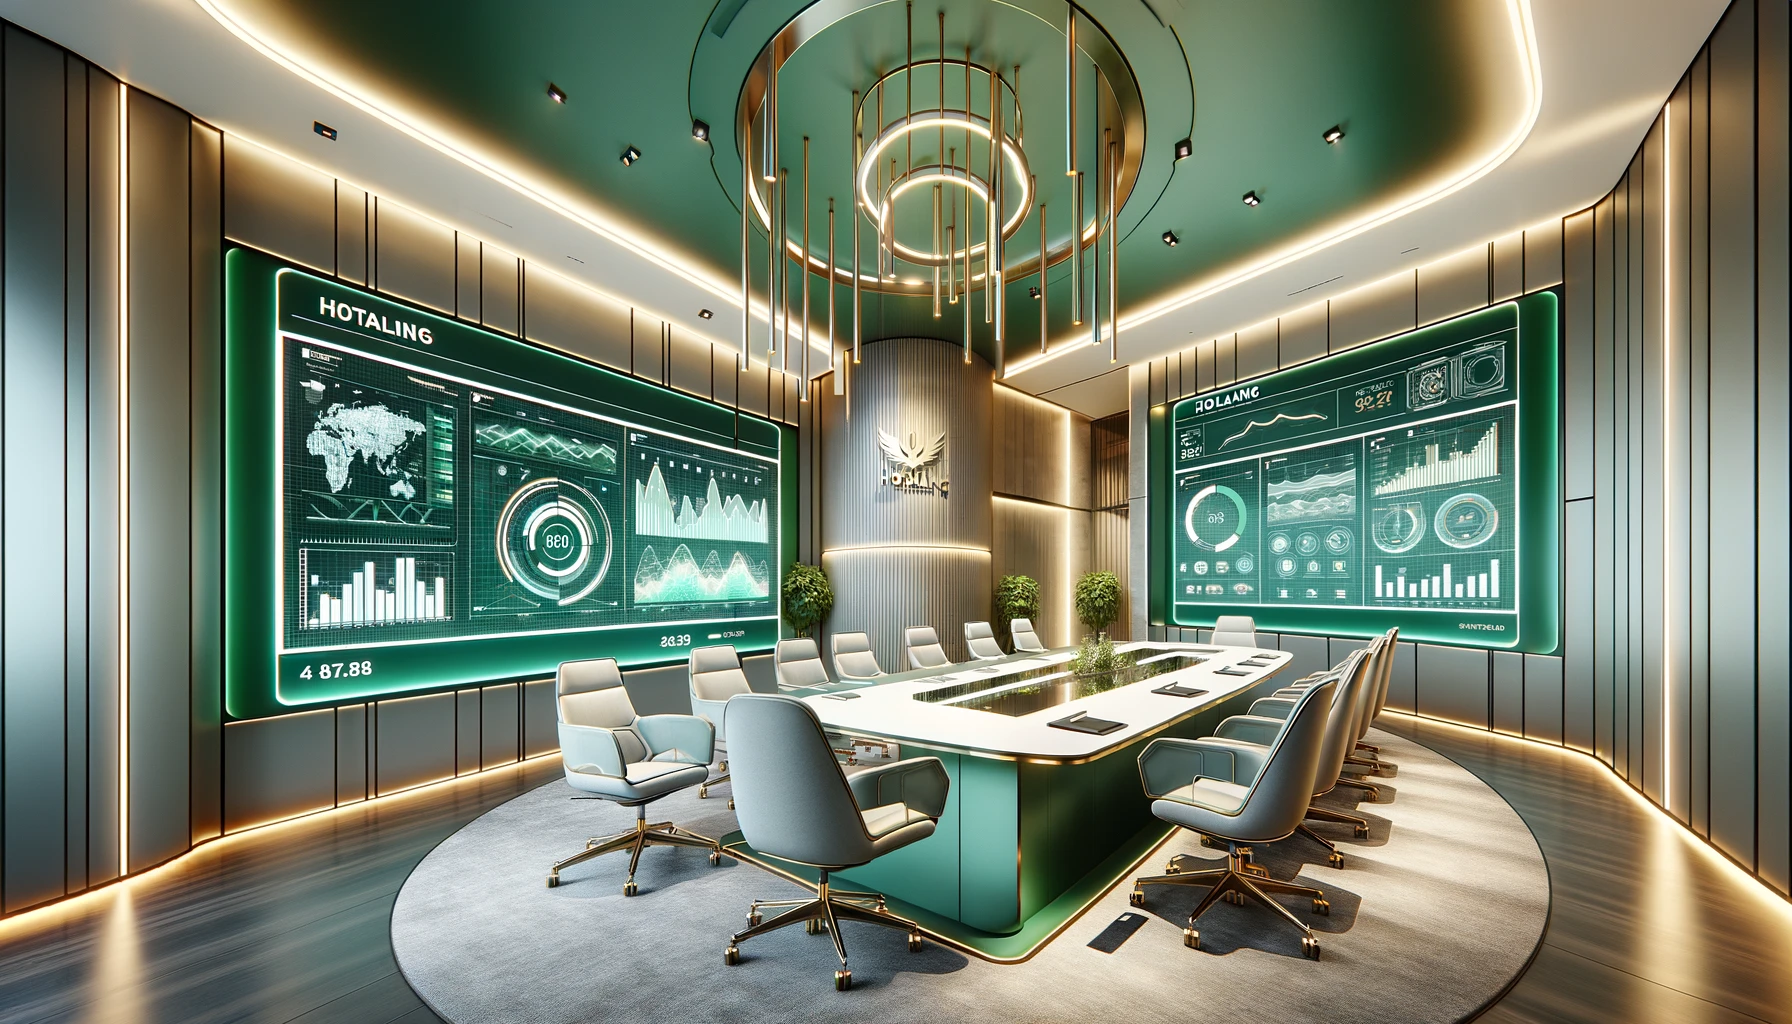 Optimizing Employee Benefits Communications Efficiency 2023-12-14 15.58.40 - A sleek, modern conference room designed for effective communication. The room features high-tech screens displaying graphs and charts, representing t